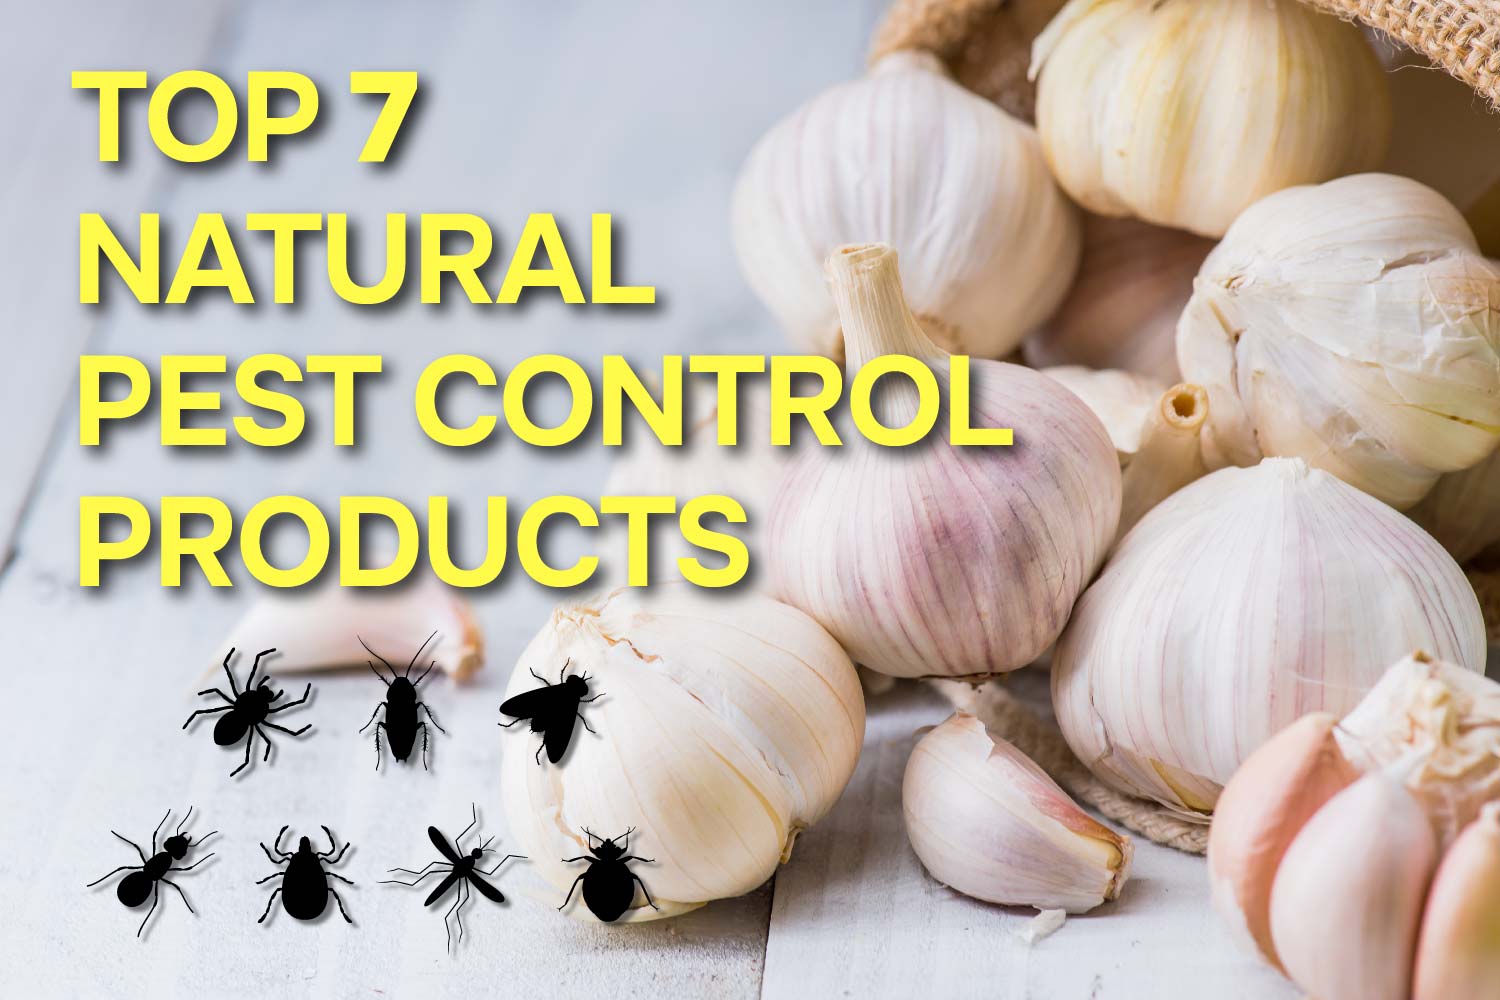 TOP 7 NATURAL PEST CONTROL PRODUCTS